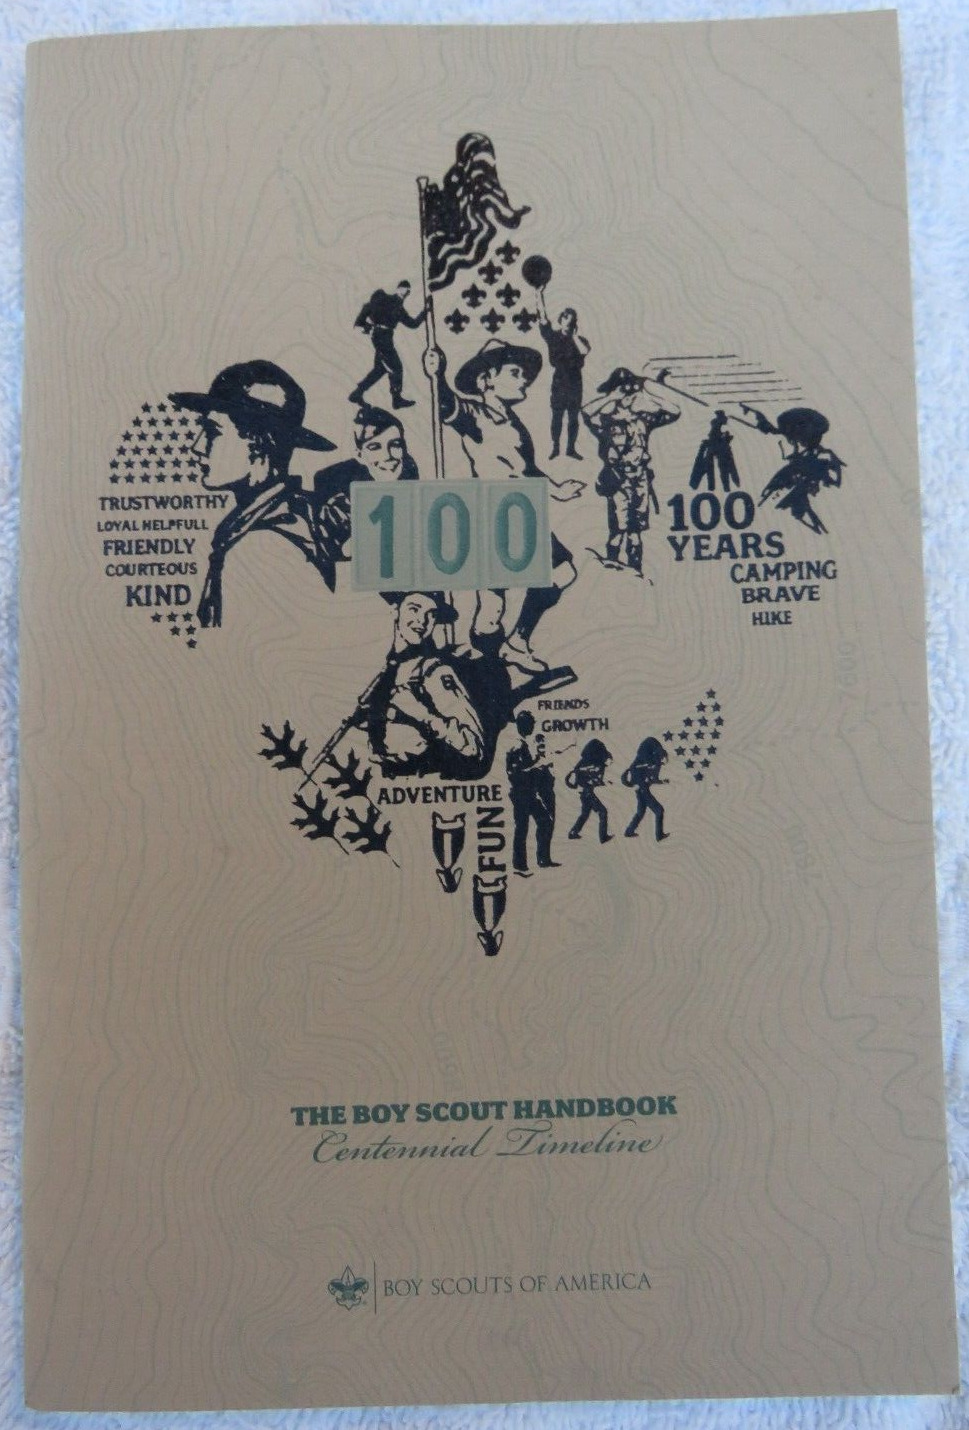 The Boy Scout Handbook Centennial Timeline 100 Year Anniver.*Full Color Photos